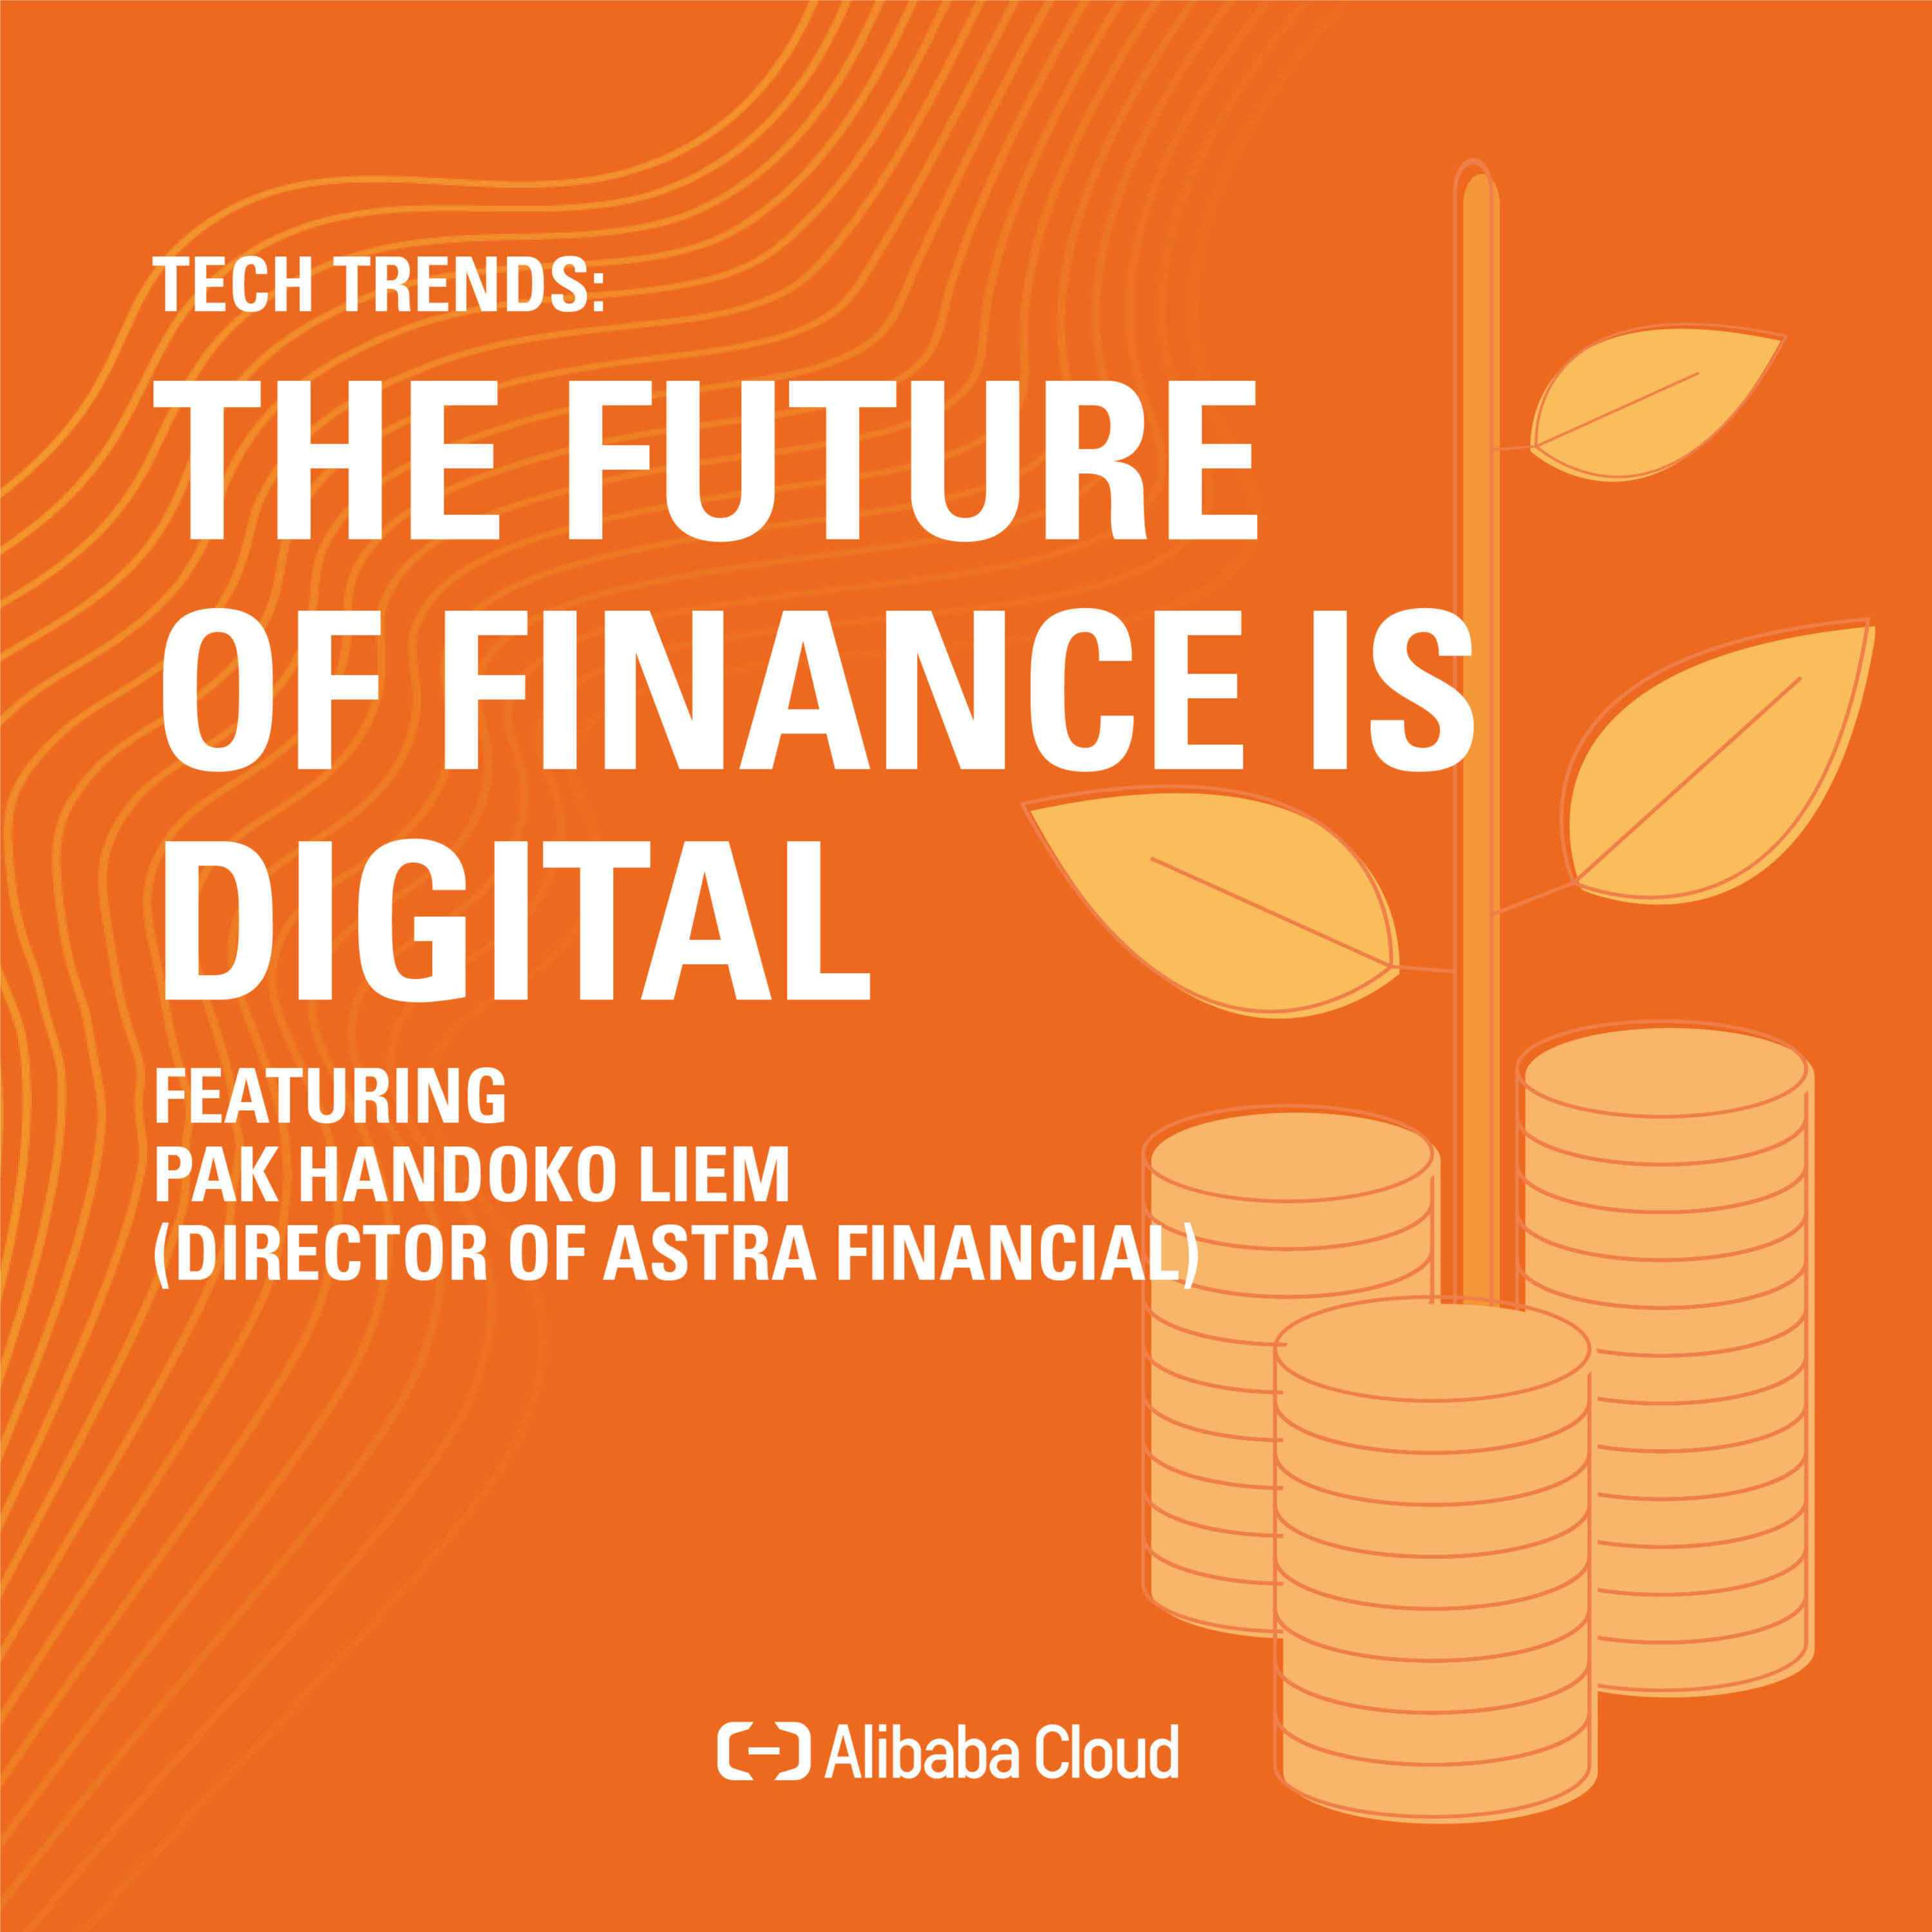 Alibaba Cloud Presents Tech Trends: The Future of Finance is Digital